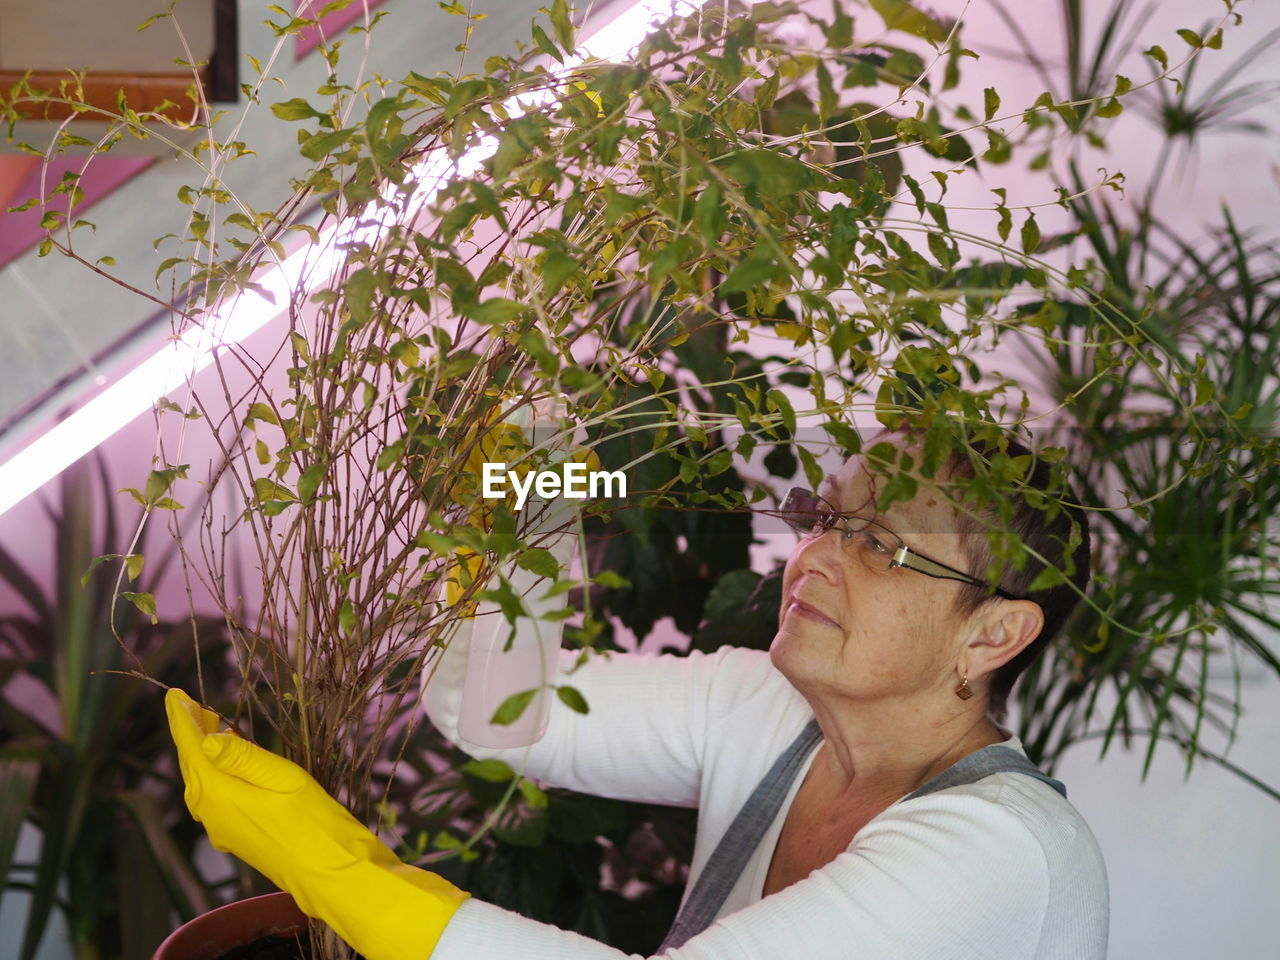 A woman cares for and waters indoor plants growing in a private house 